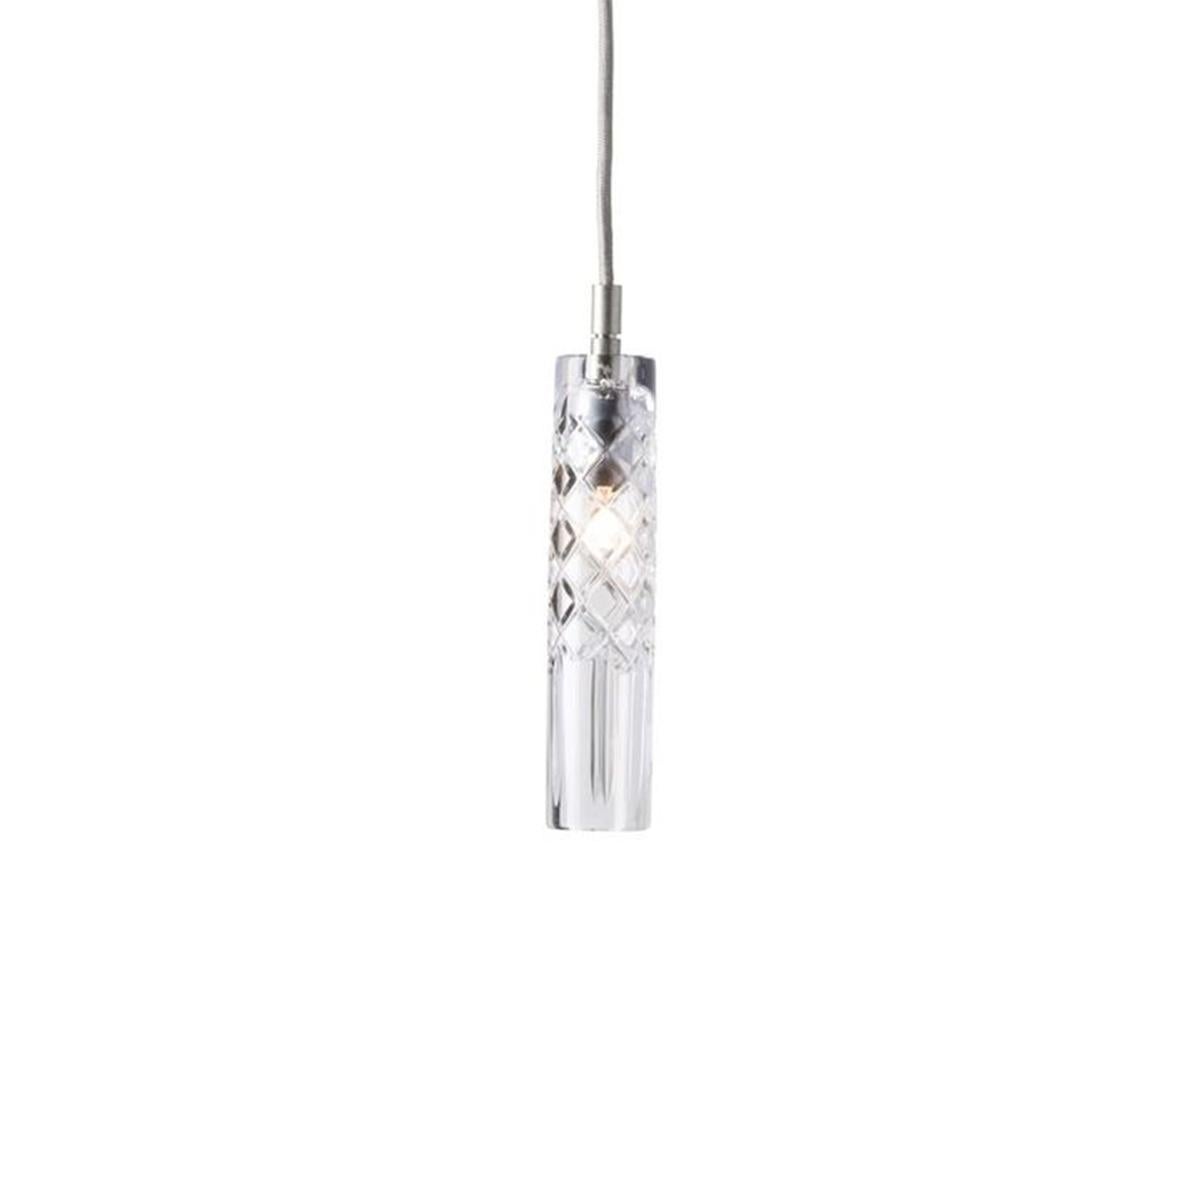 Three-Piece Set of Mouth Blown Etched Crystal Pendant Lamps, Silver im Zustand „Neu“ in Paris, FR